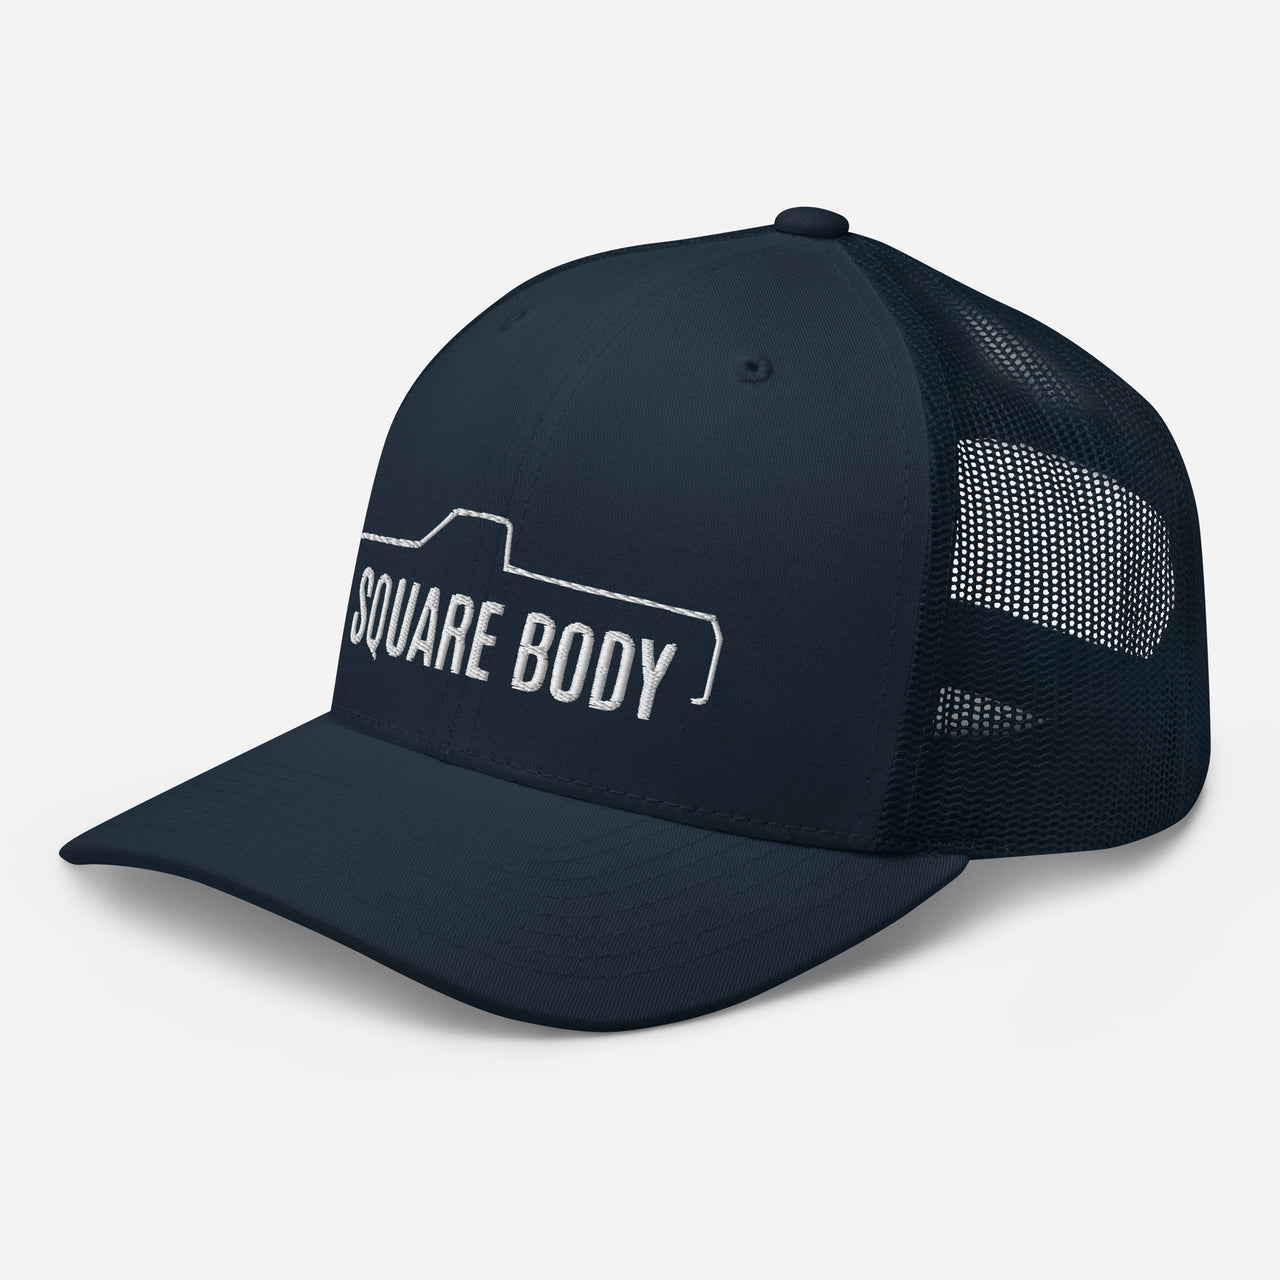 3/4 view of Square body c10 k10 trucker hat from aggressive thread in navy